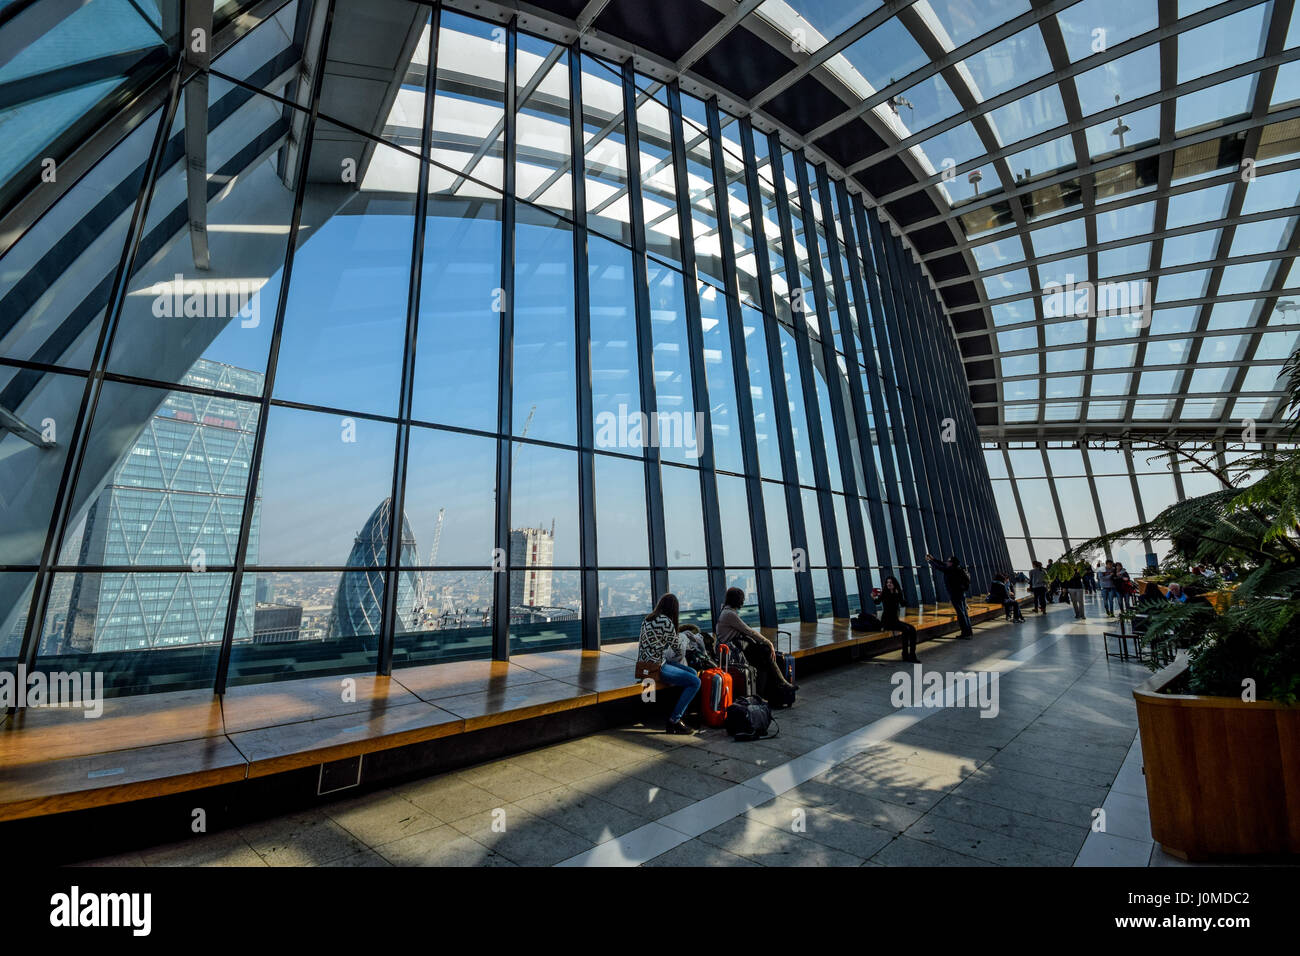 Views from the Sky Garden of the Walkie Talkie building in London Stock Photo